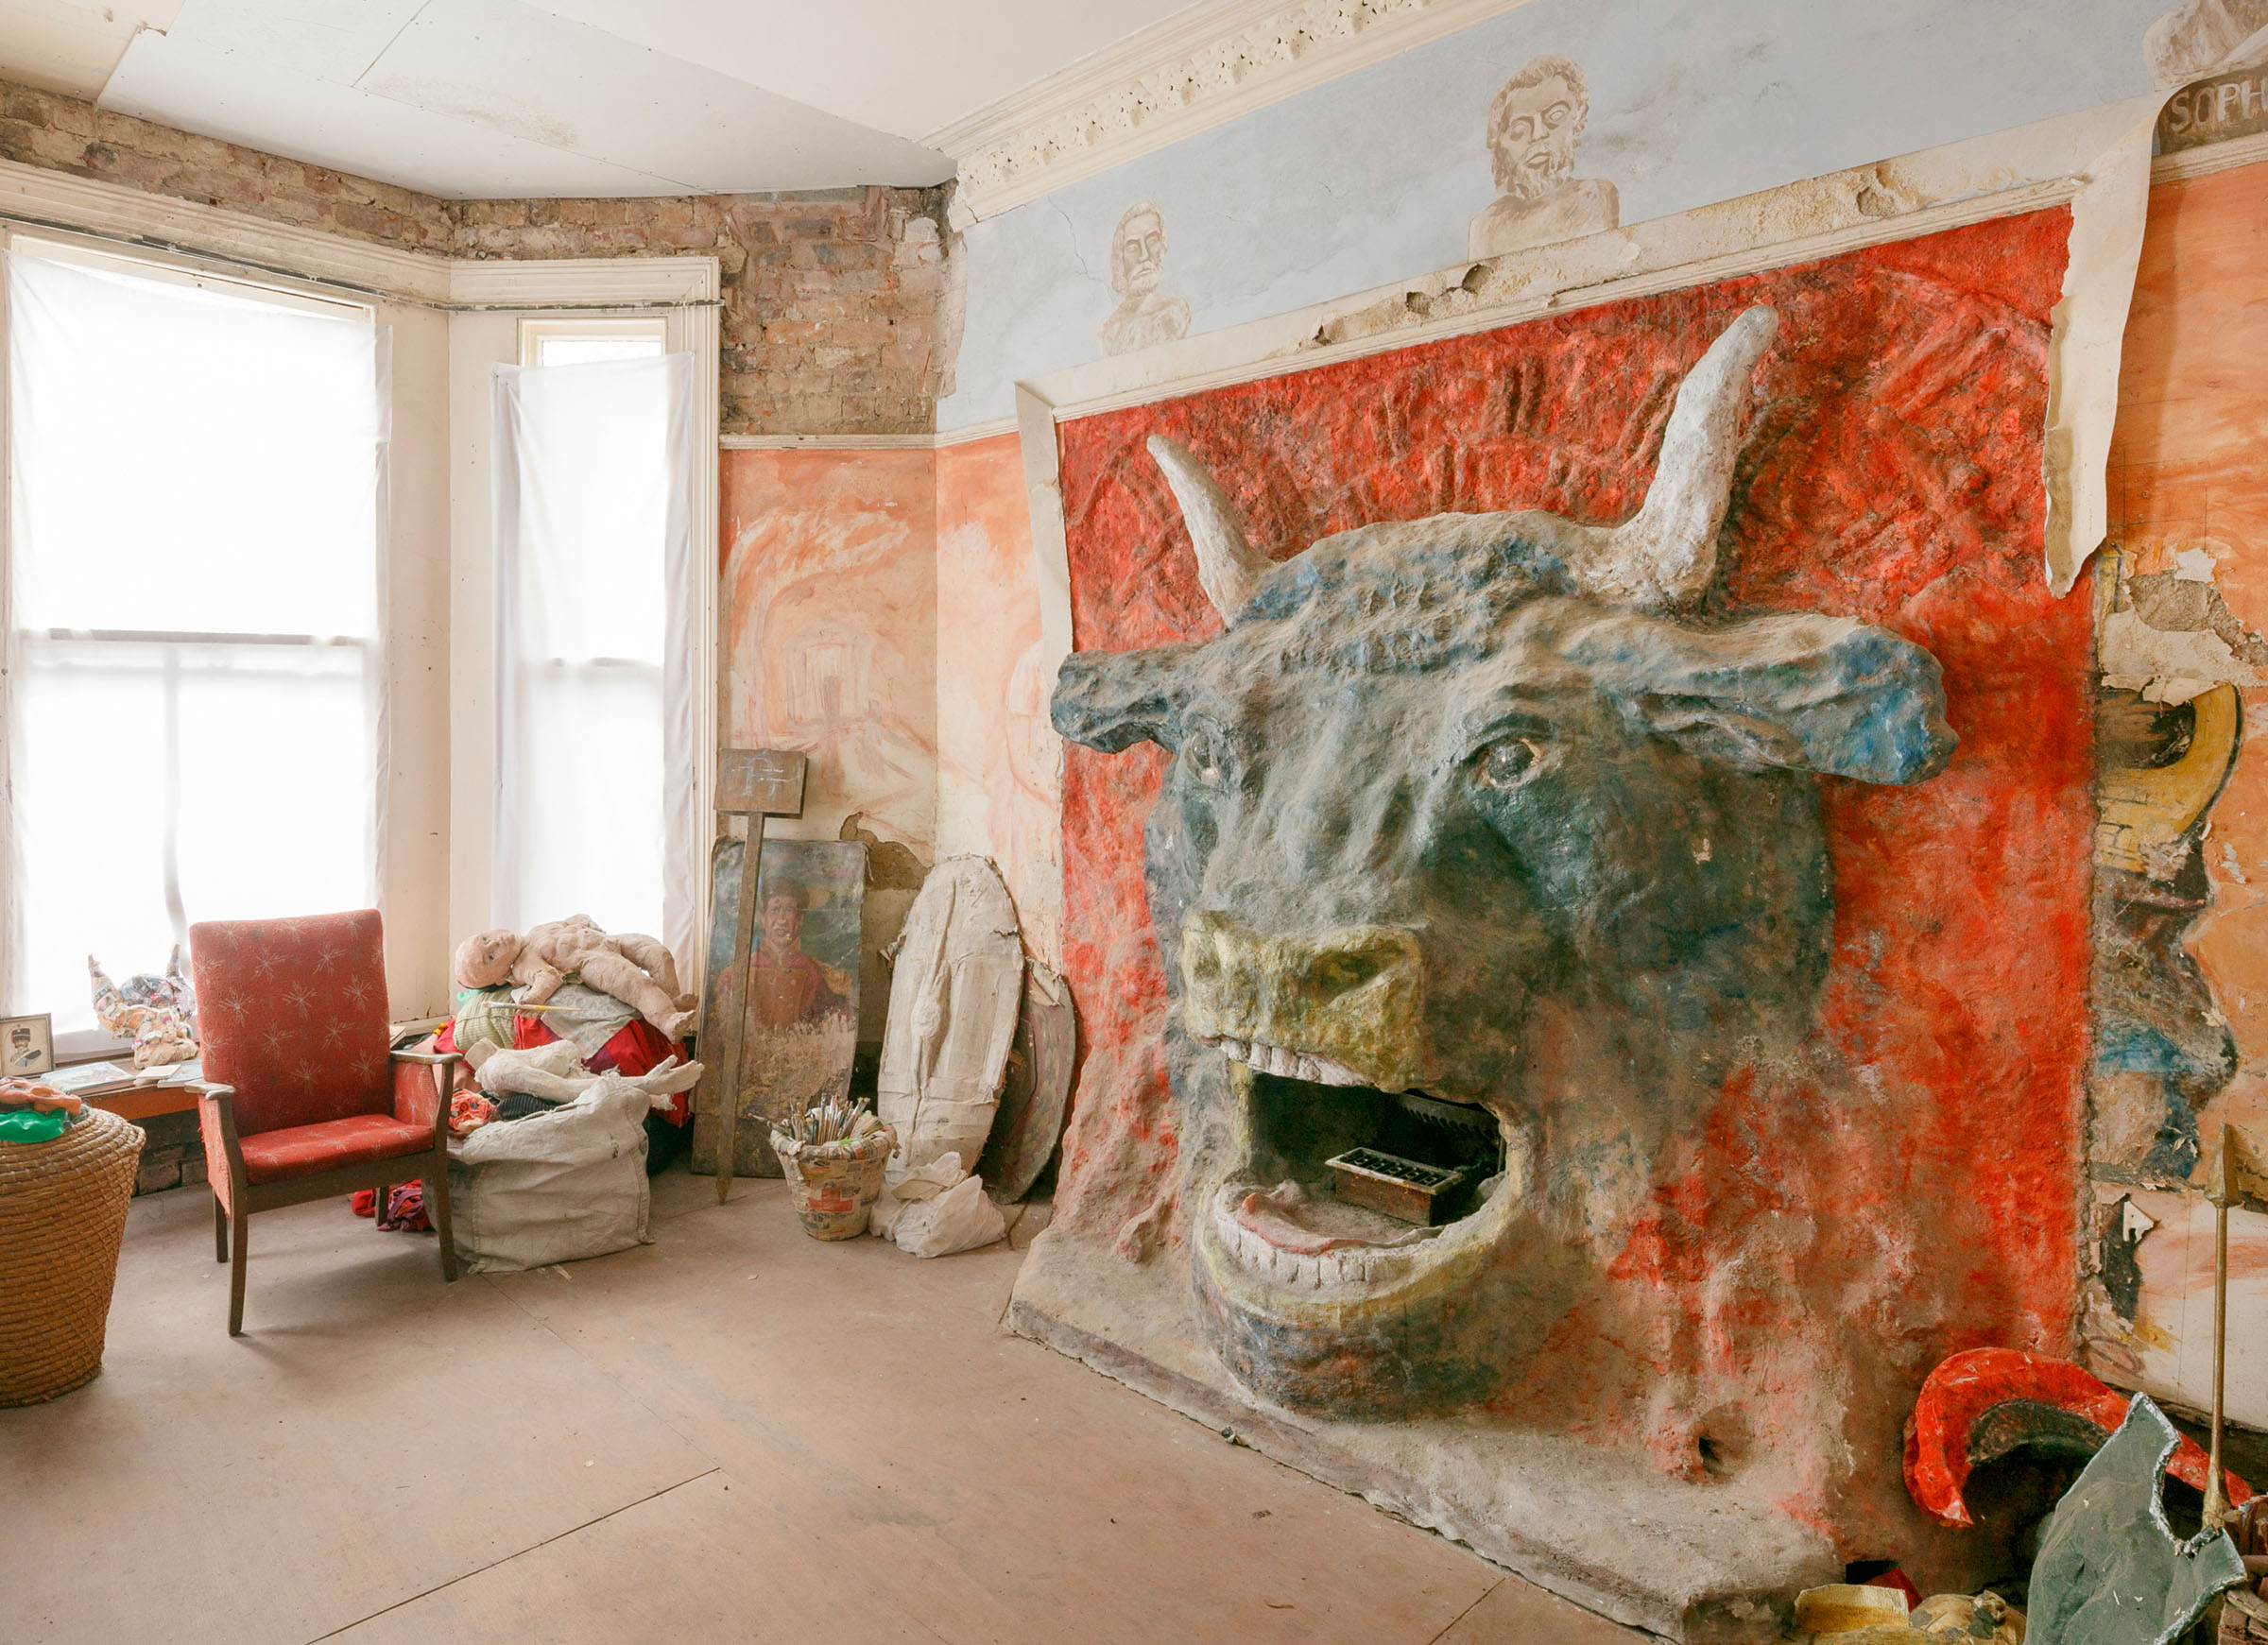 A photograph of a room containing a large Minotaur head sculpture, a chair, a bay window and Roman-Greco-inspired artwork painted on the walls.